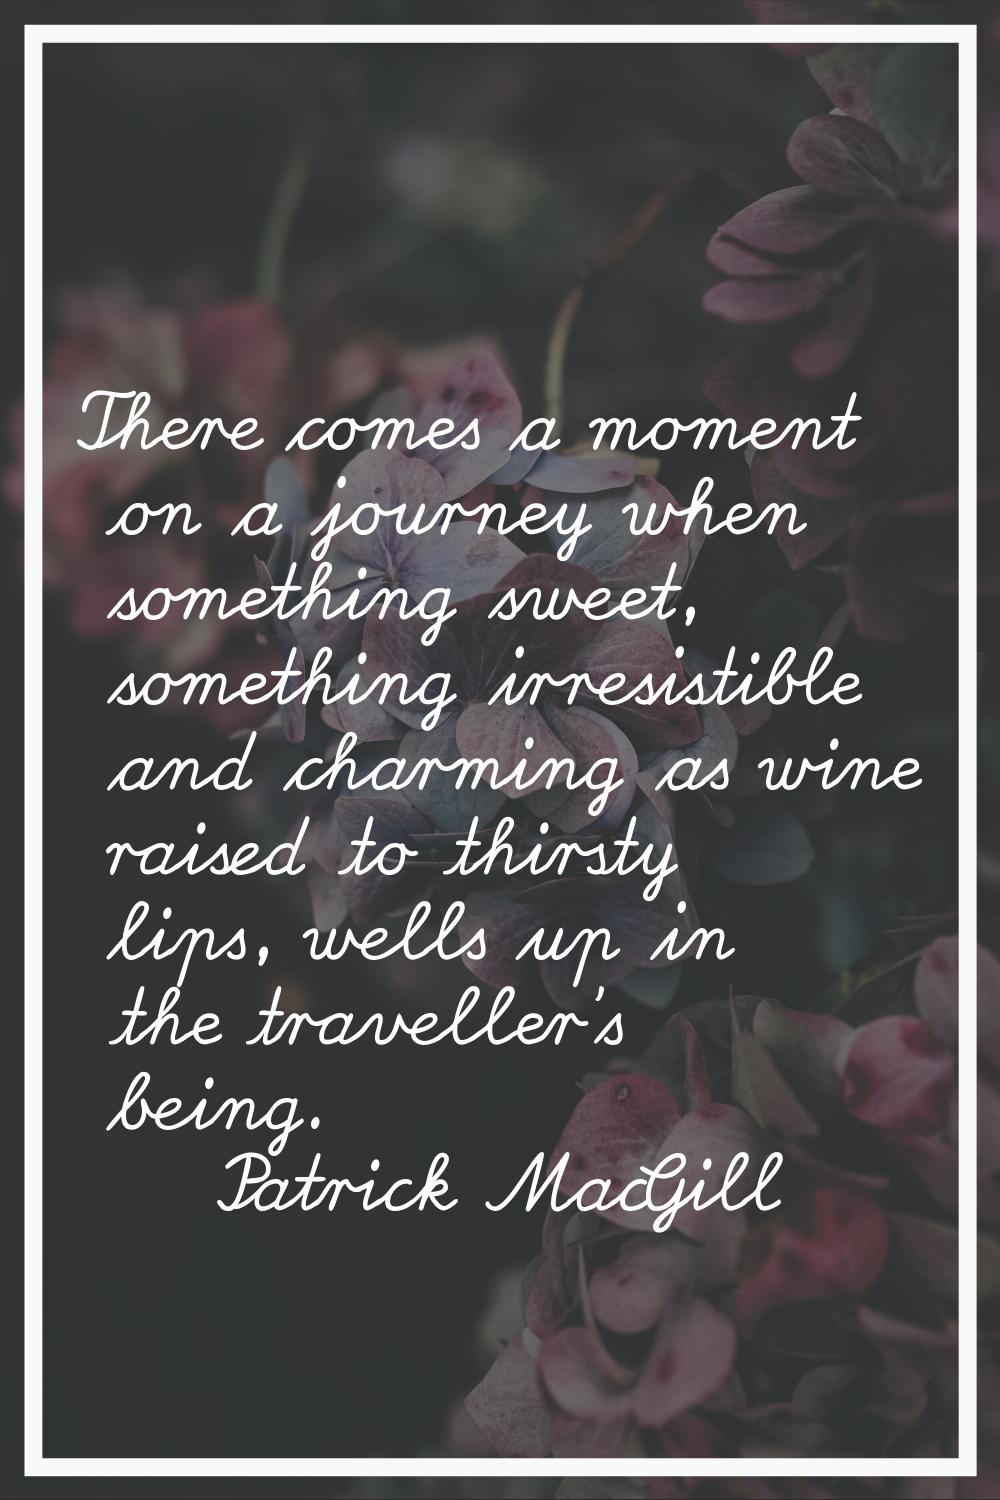 There comes a moment on a journey when something sweet, something irresistible and charming as wine